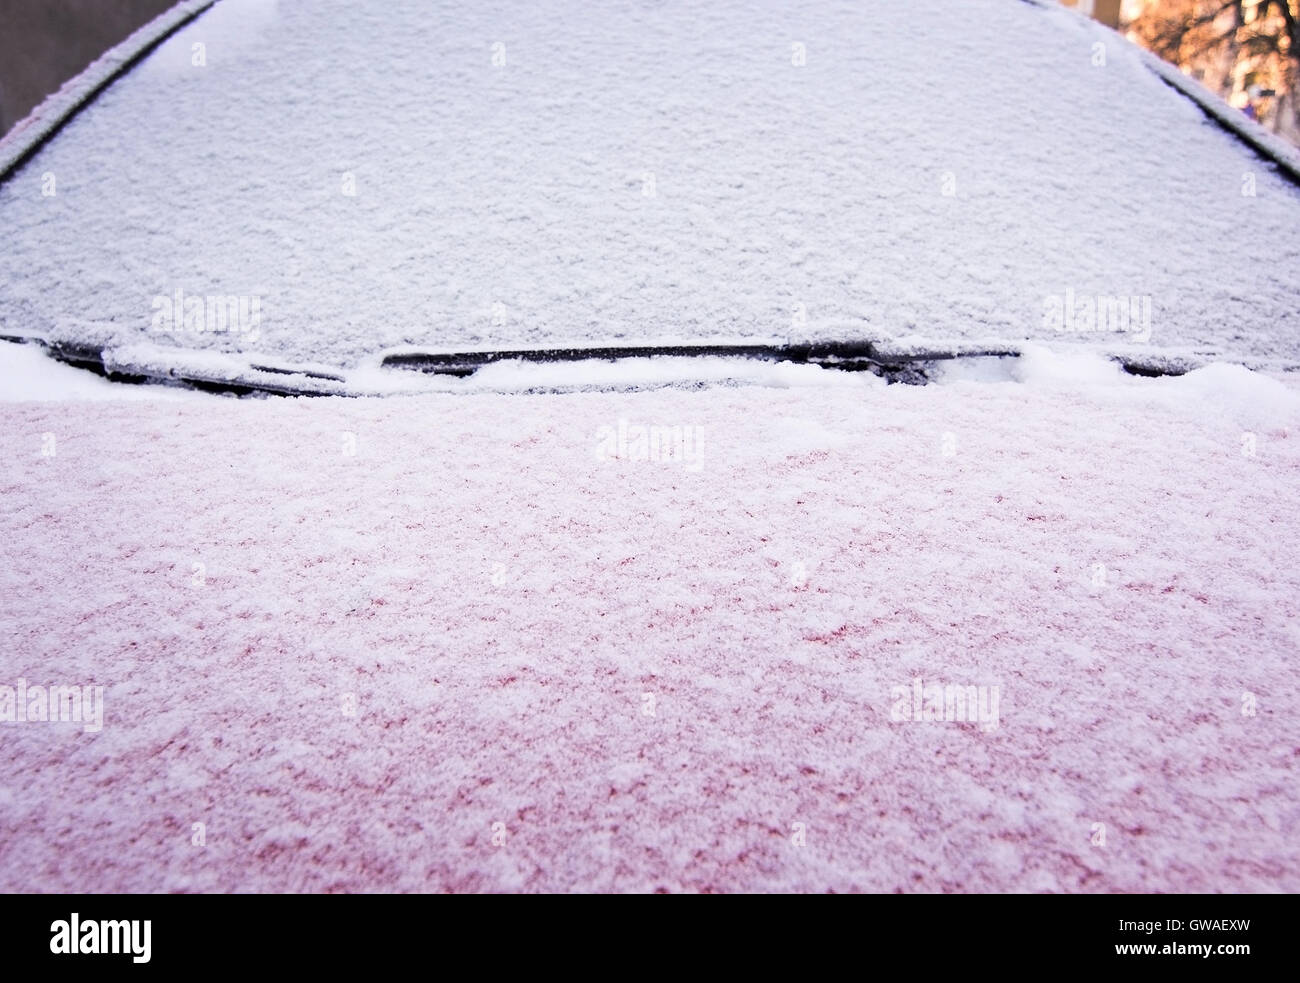 Snow and ice covers red car and window outside in December closeup. Stock Photo